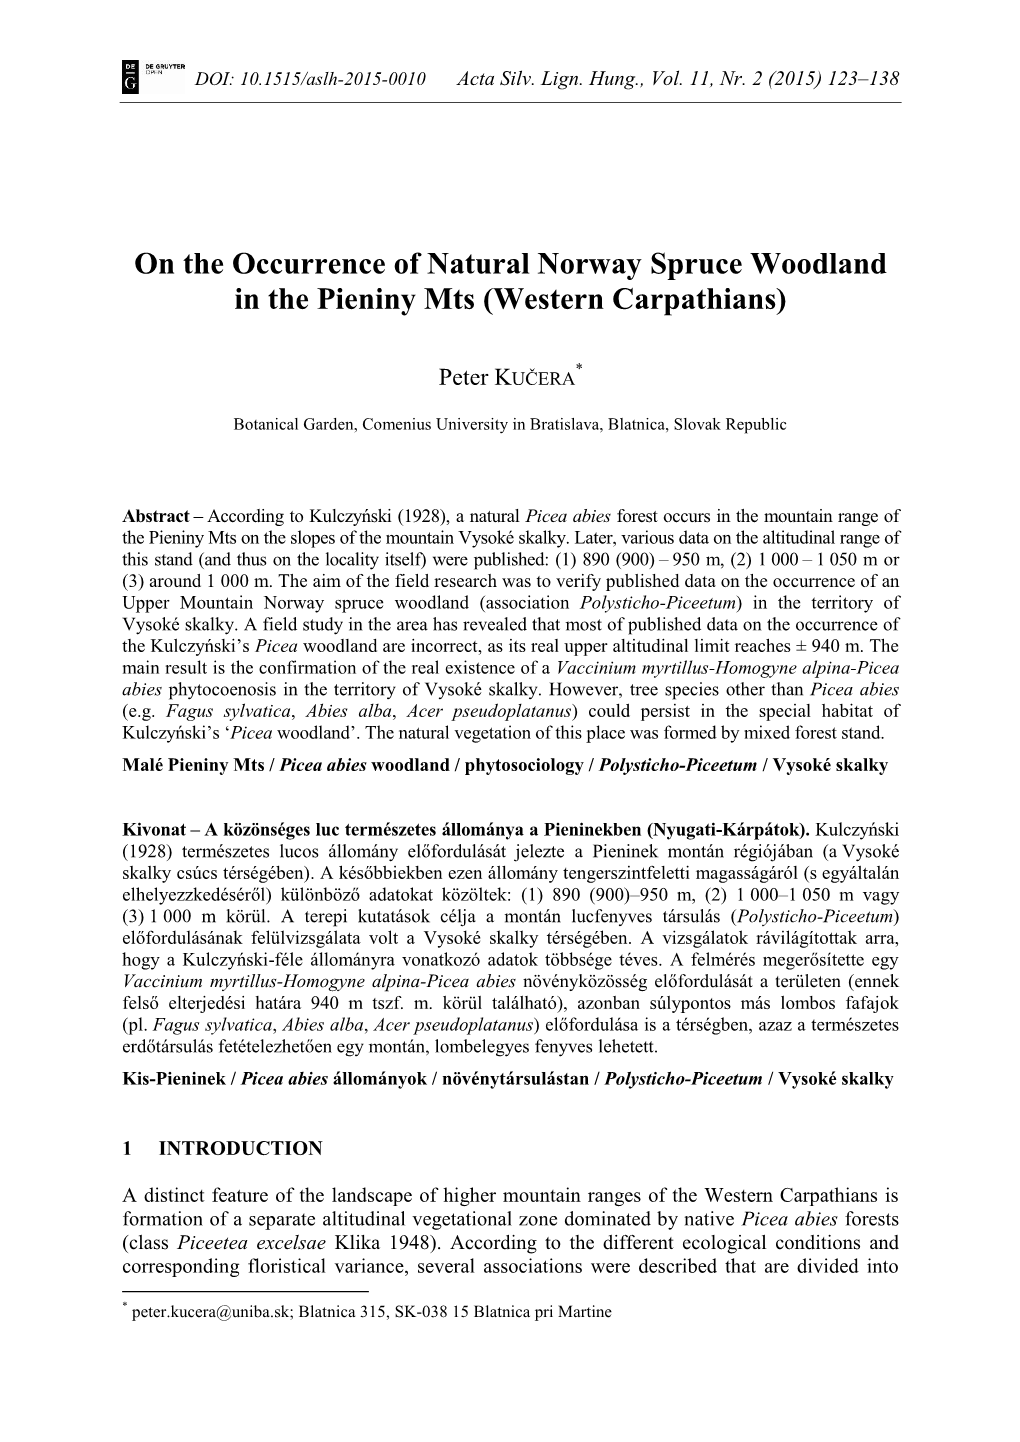 On the Occurrence of Natural Norway Spruce Woodland in the Pieniny Mts (Western Carpathians)